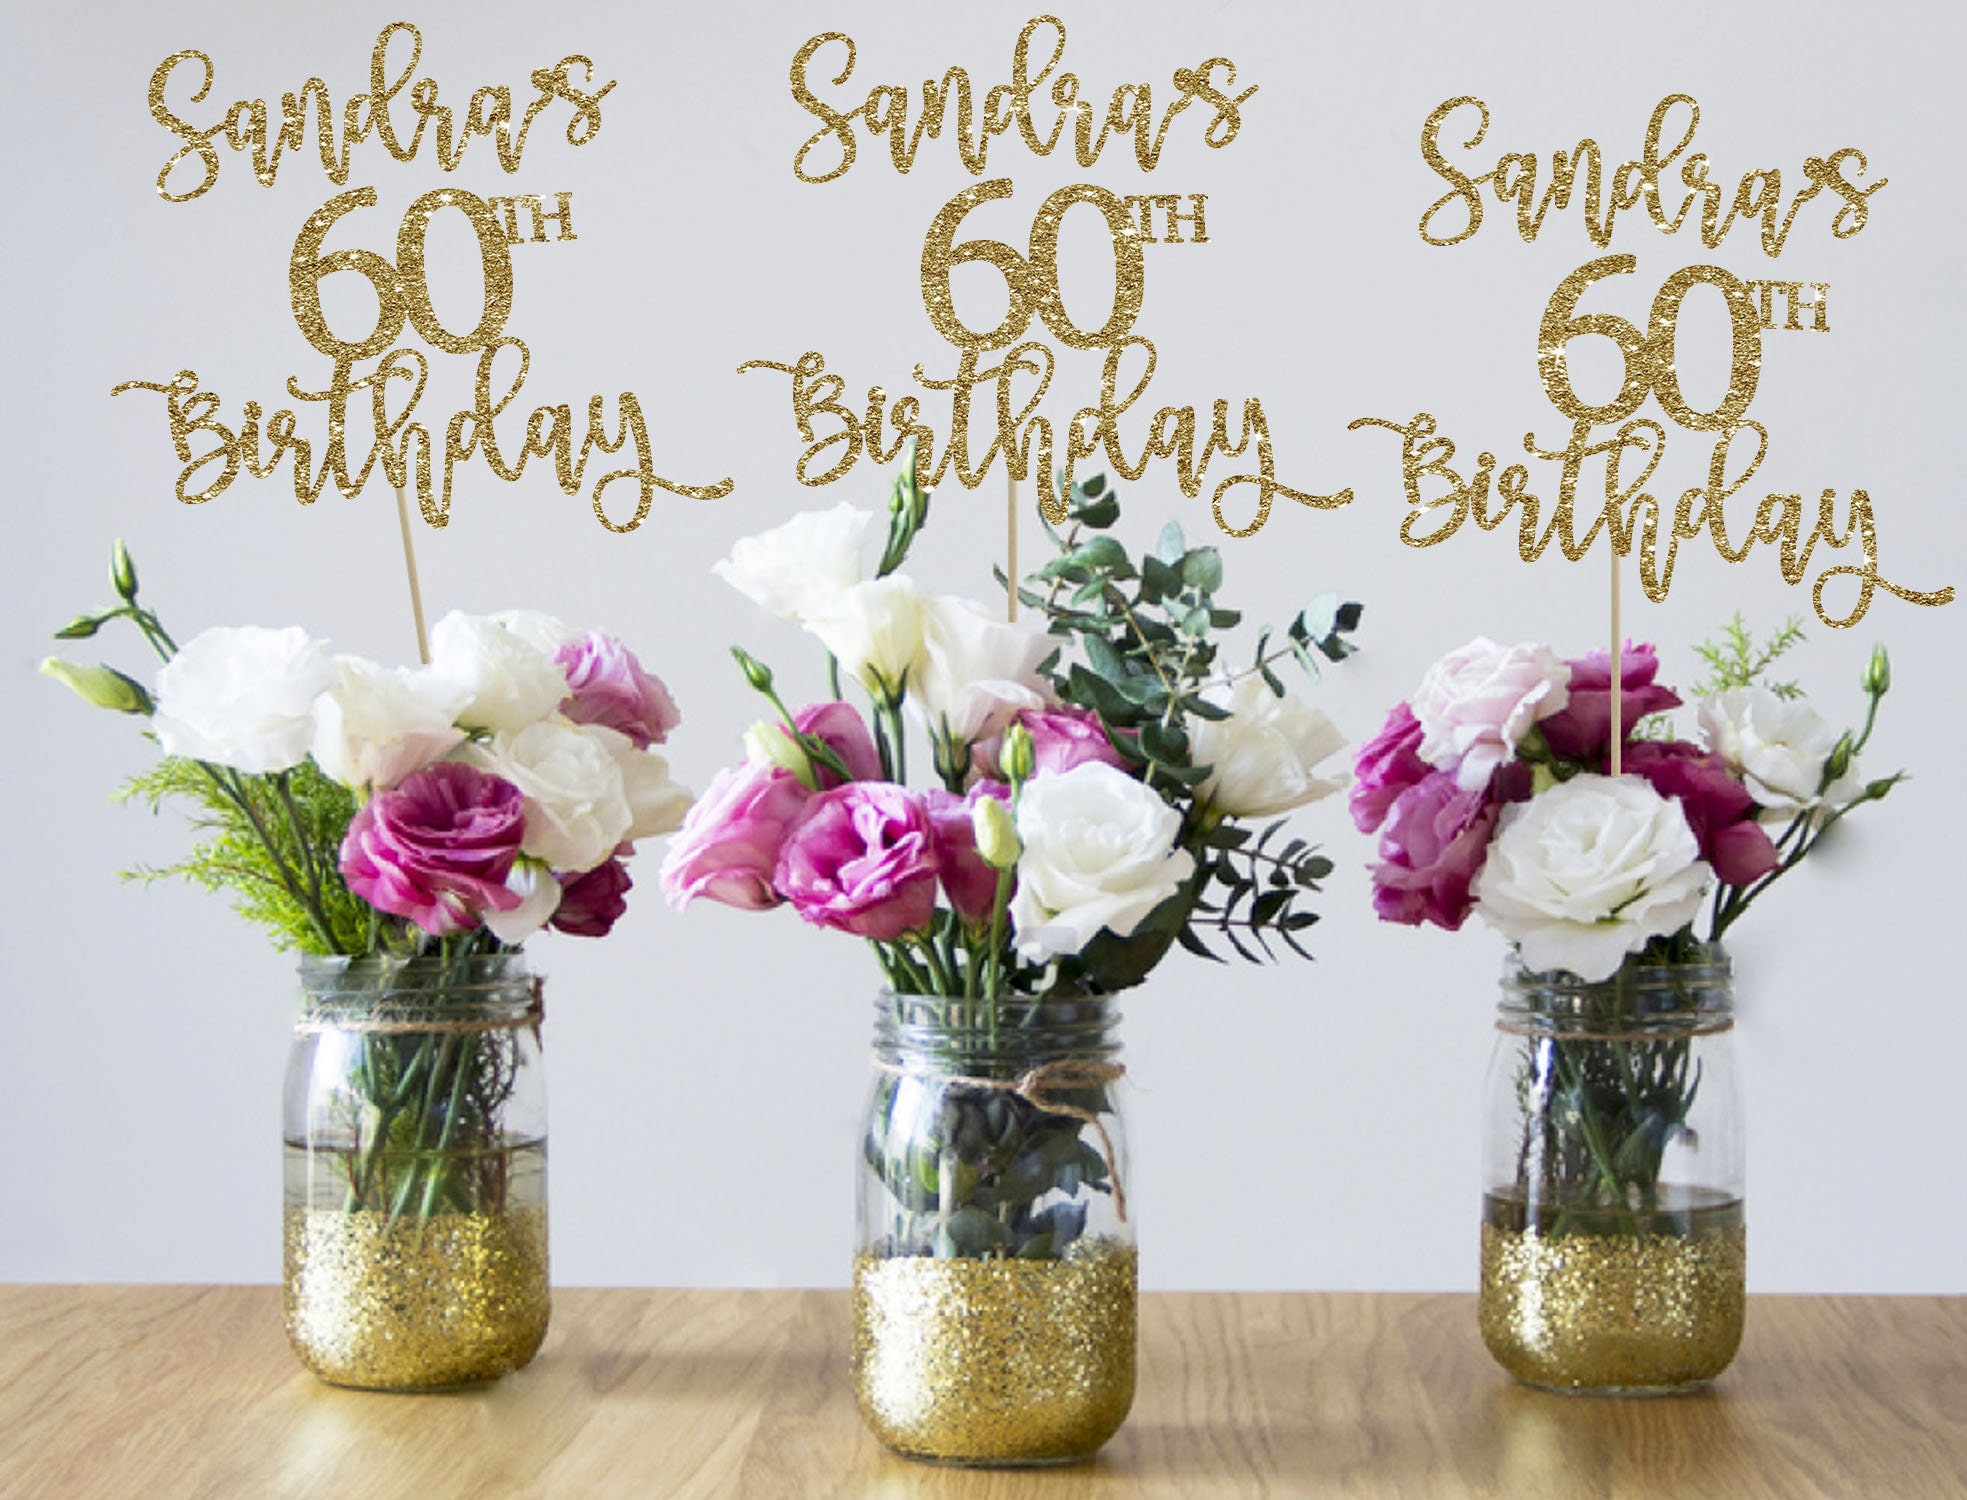 60th Birthday Centerpieces 60th Centerpieces 60th Birthday - Etsy